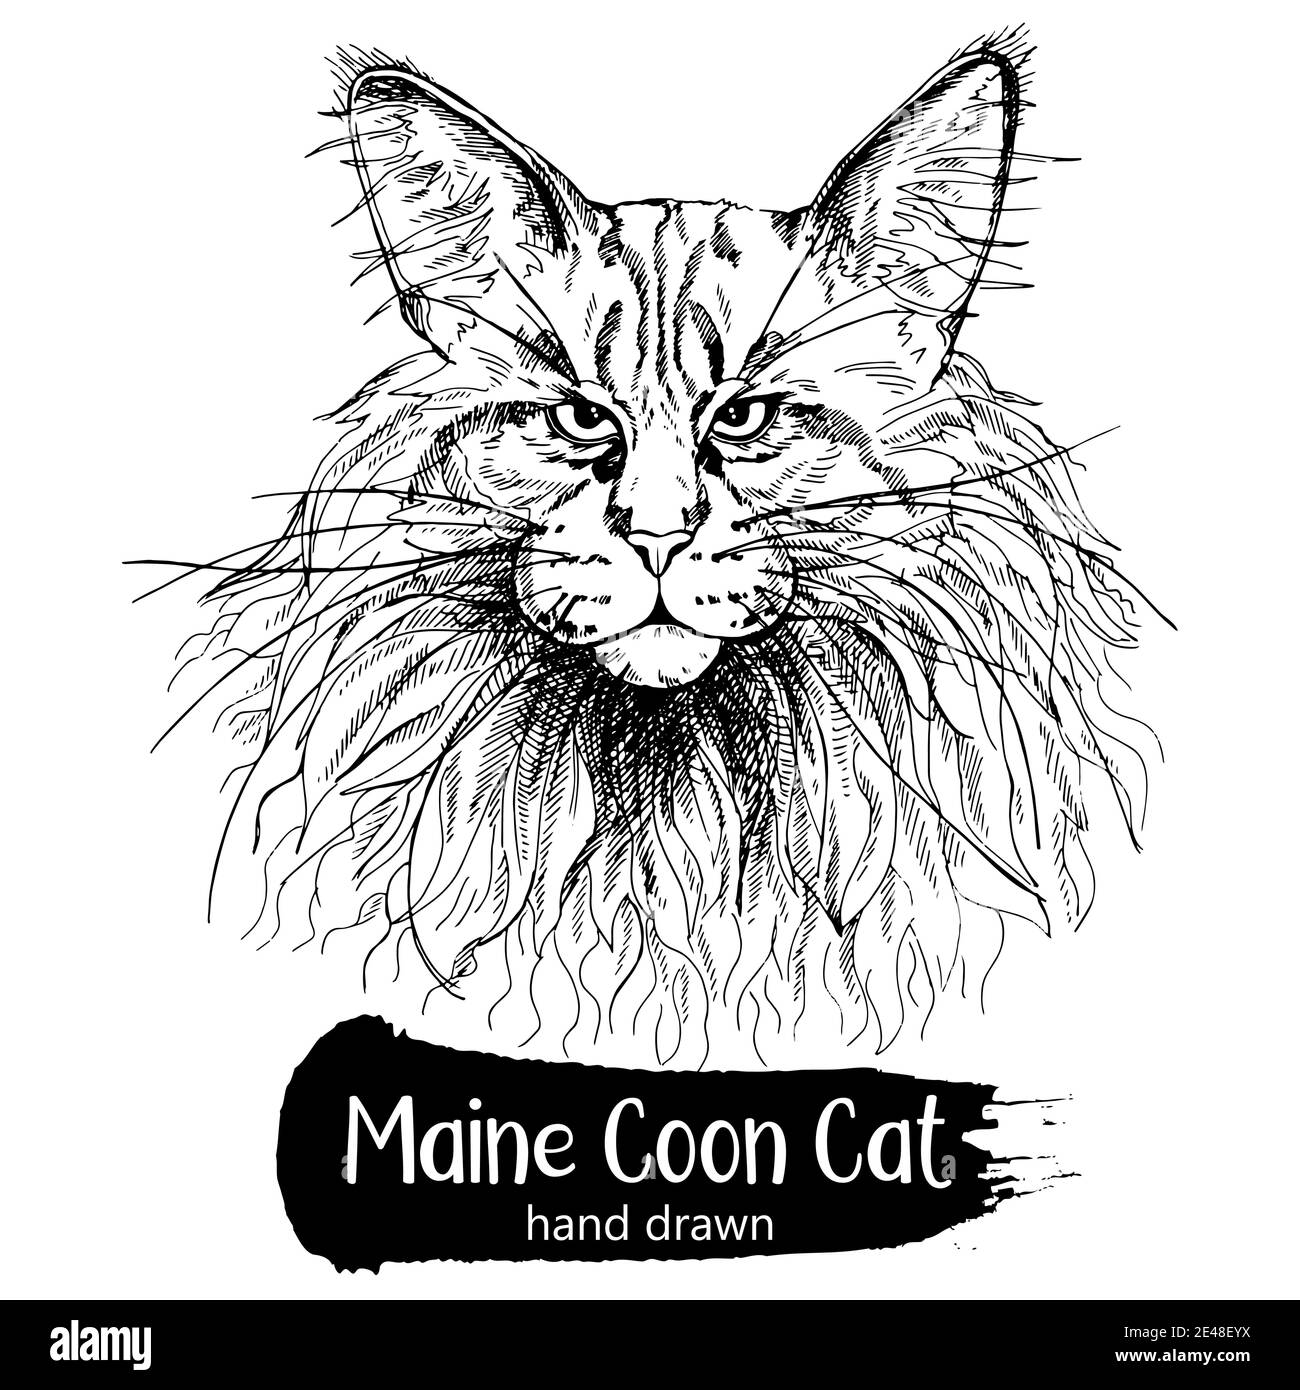 How to draw the Maine Coon cat  Sketchok easy drawing guides